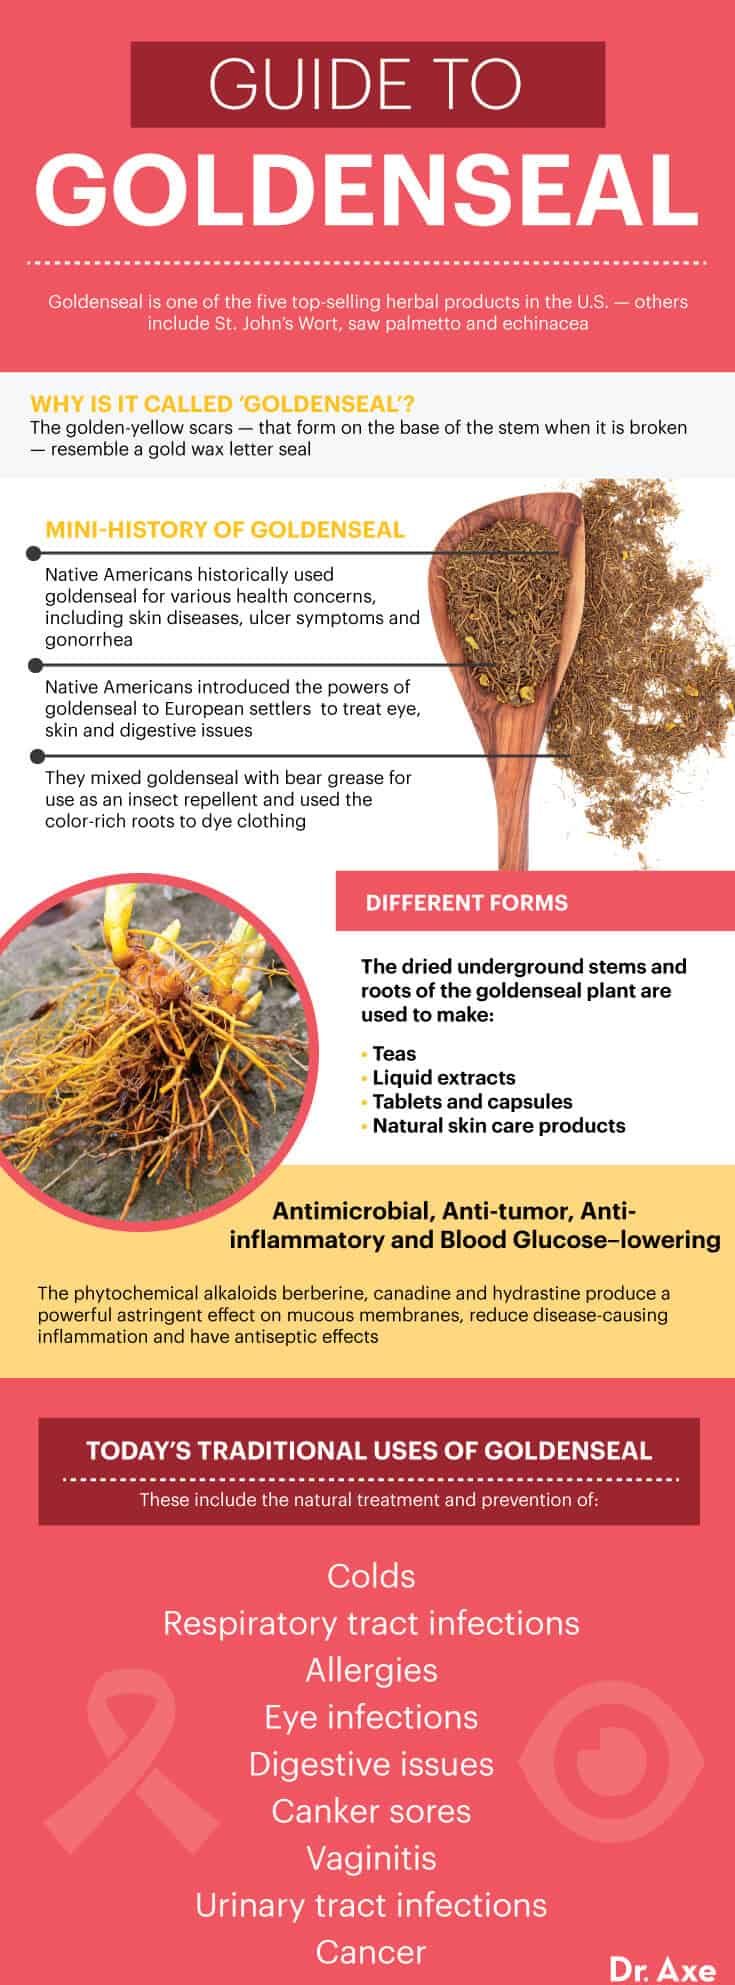 Goldenseal Benefits, Uses And Dosage - Dr. Axe